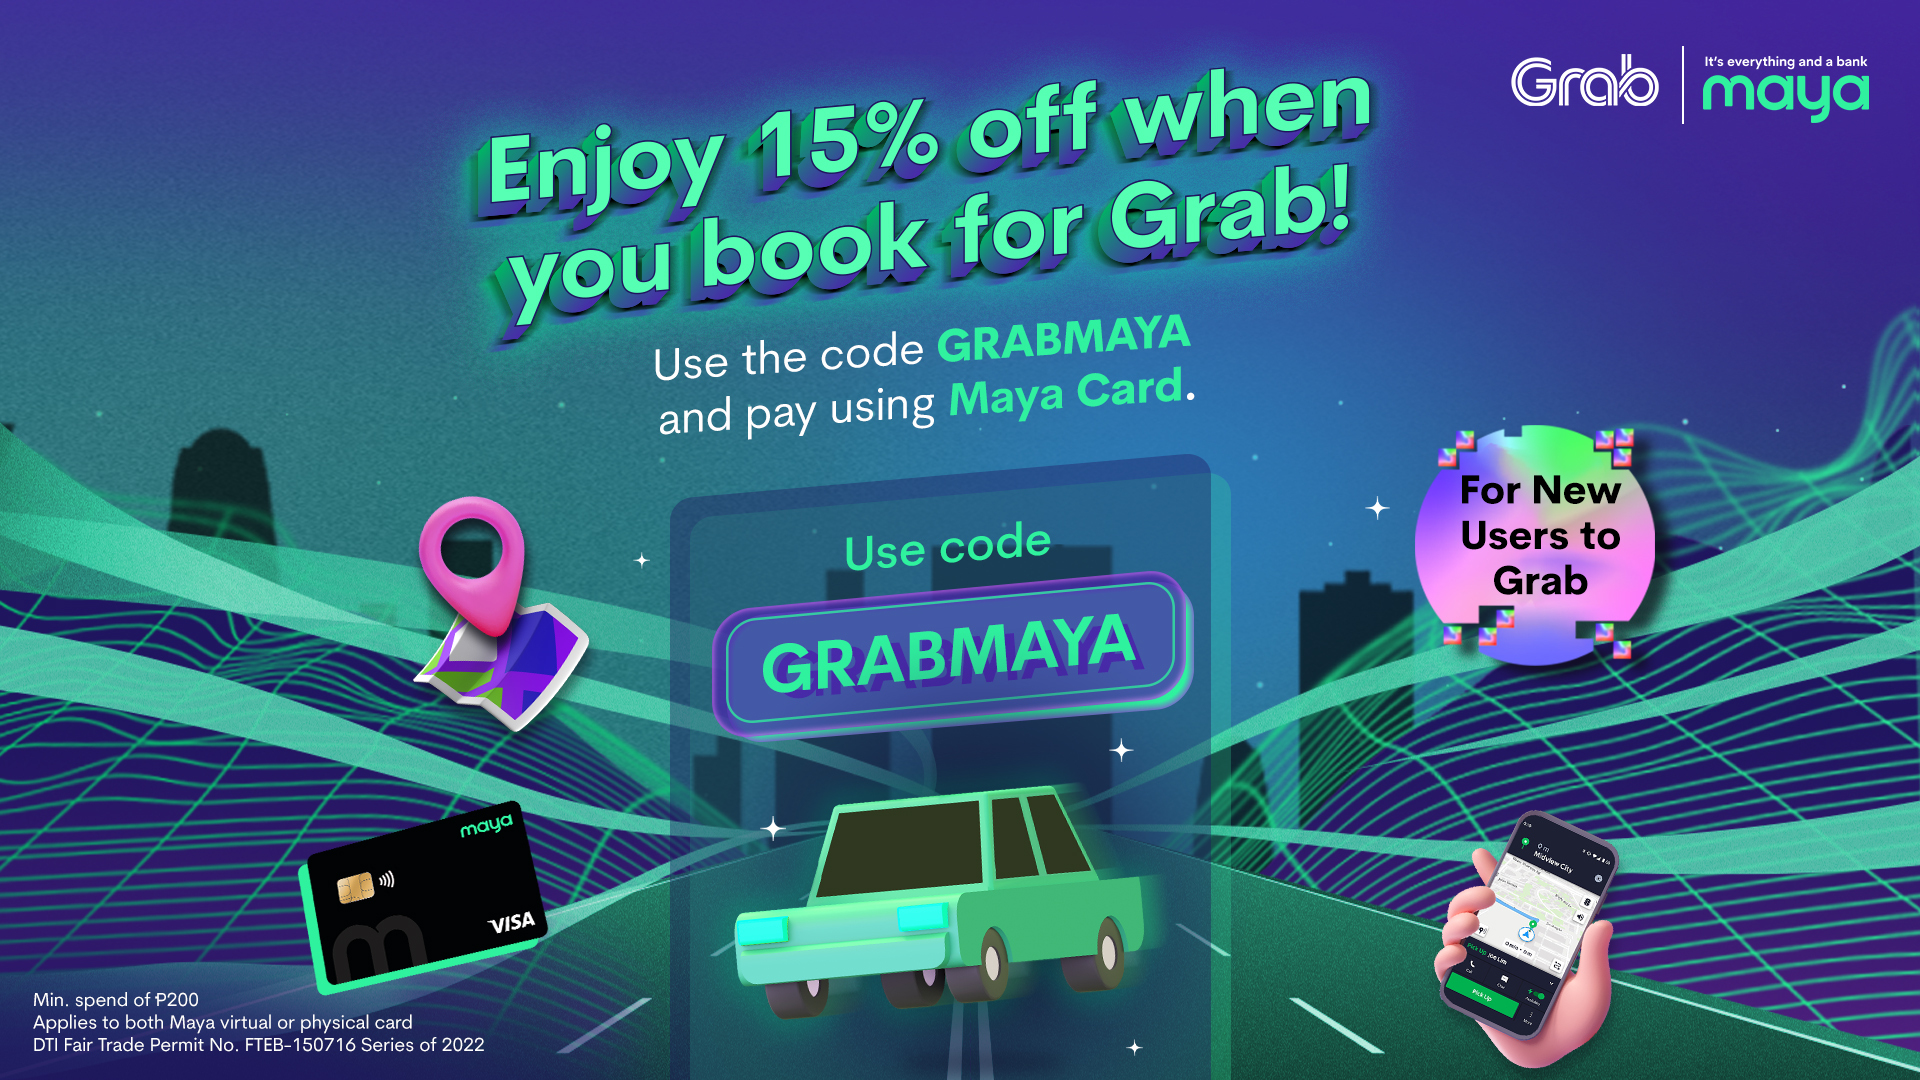 Get 15% OFF when you book for Grab!